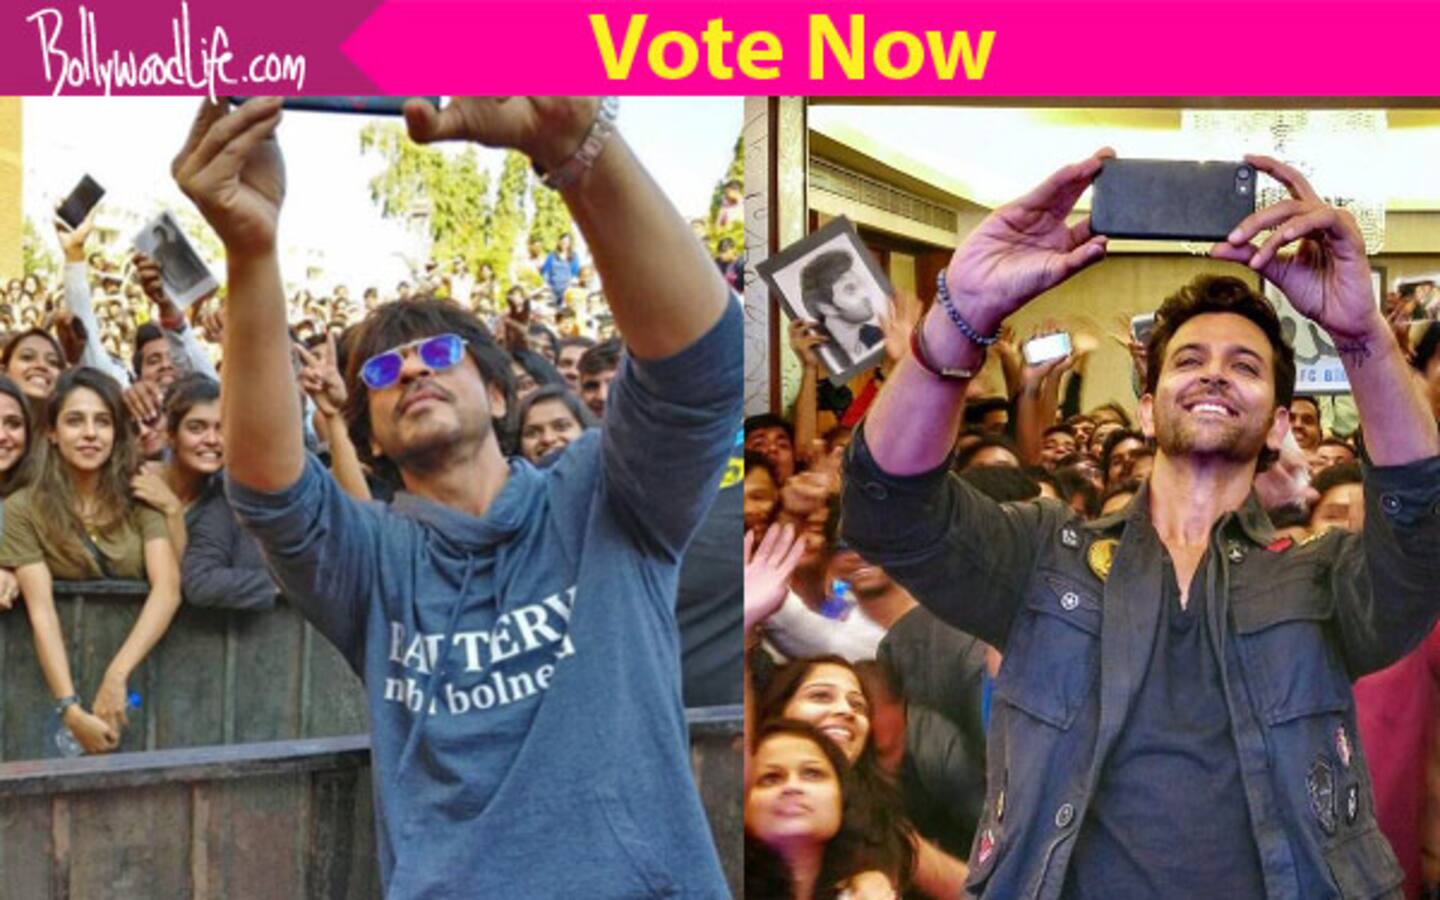 Shah Rukh Khan or Hrithik Roshan - Whose selfie with fans is your favourite?